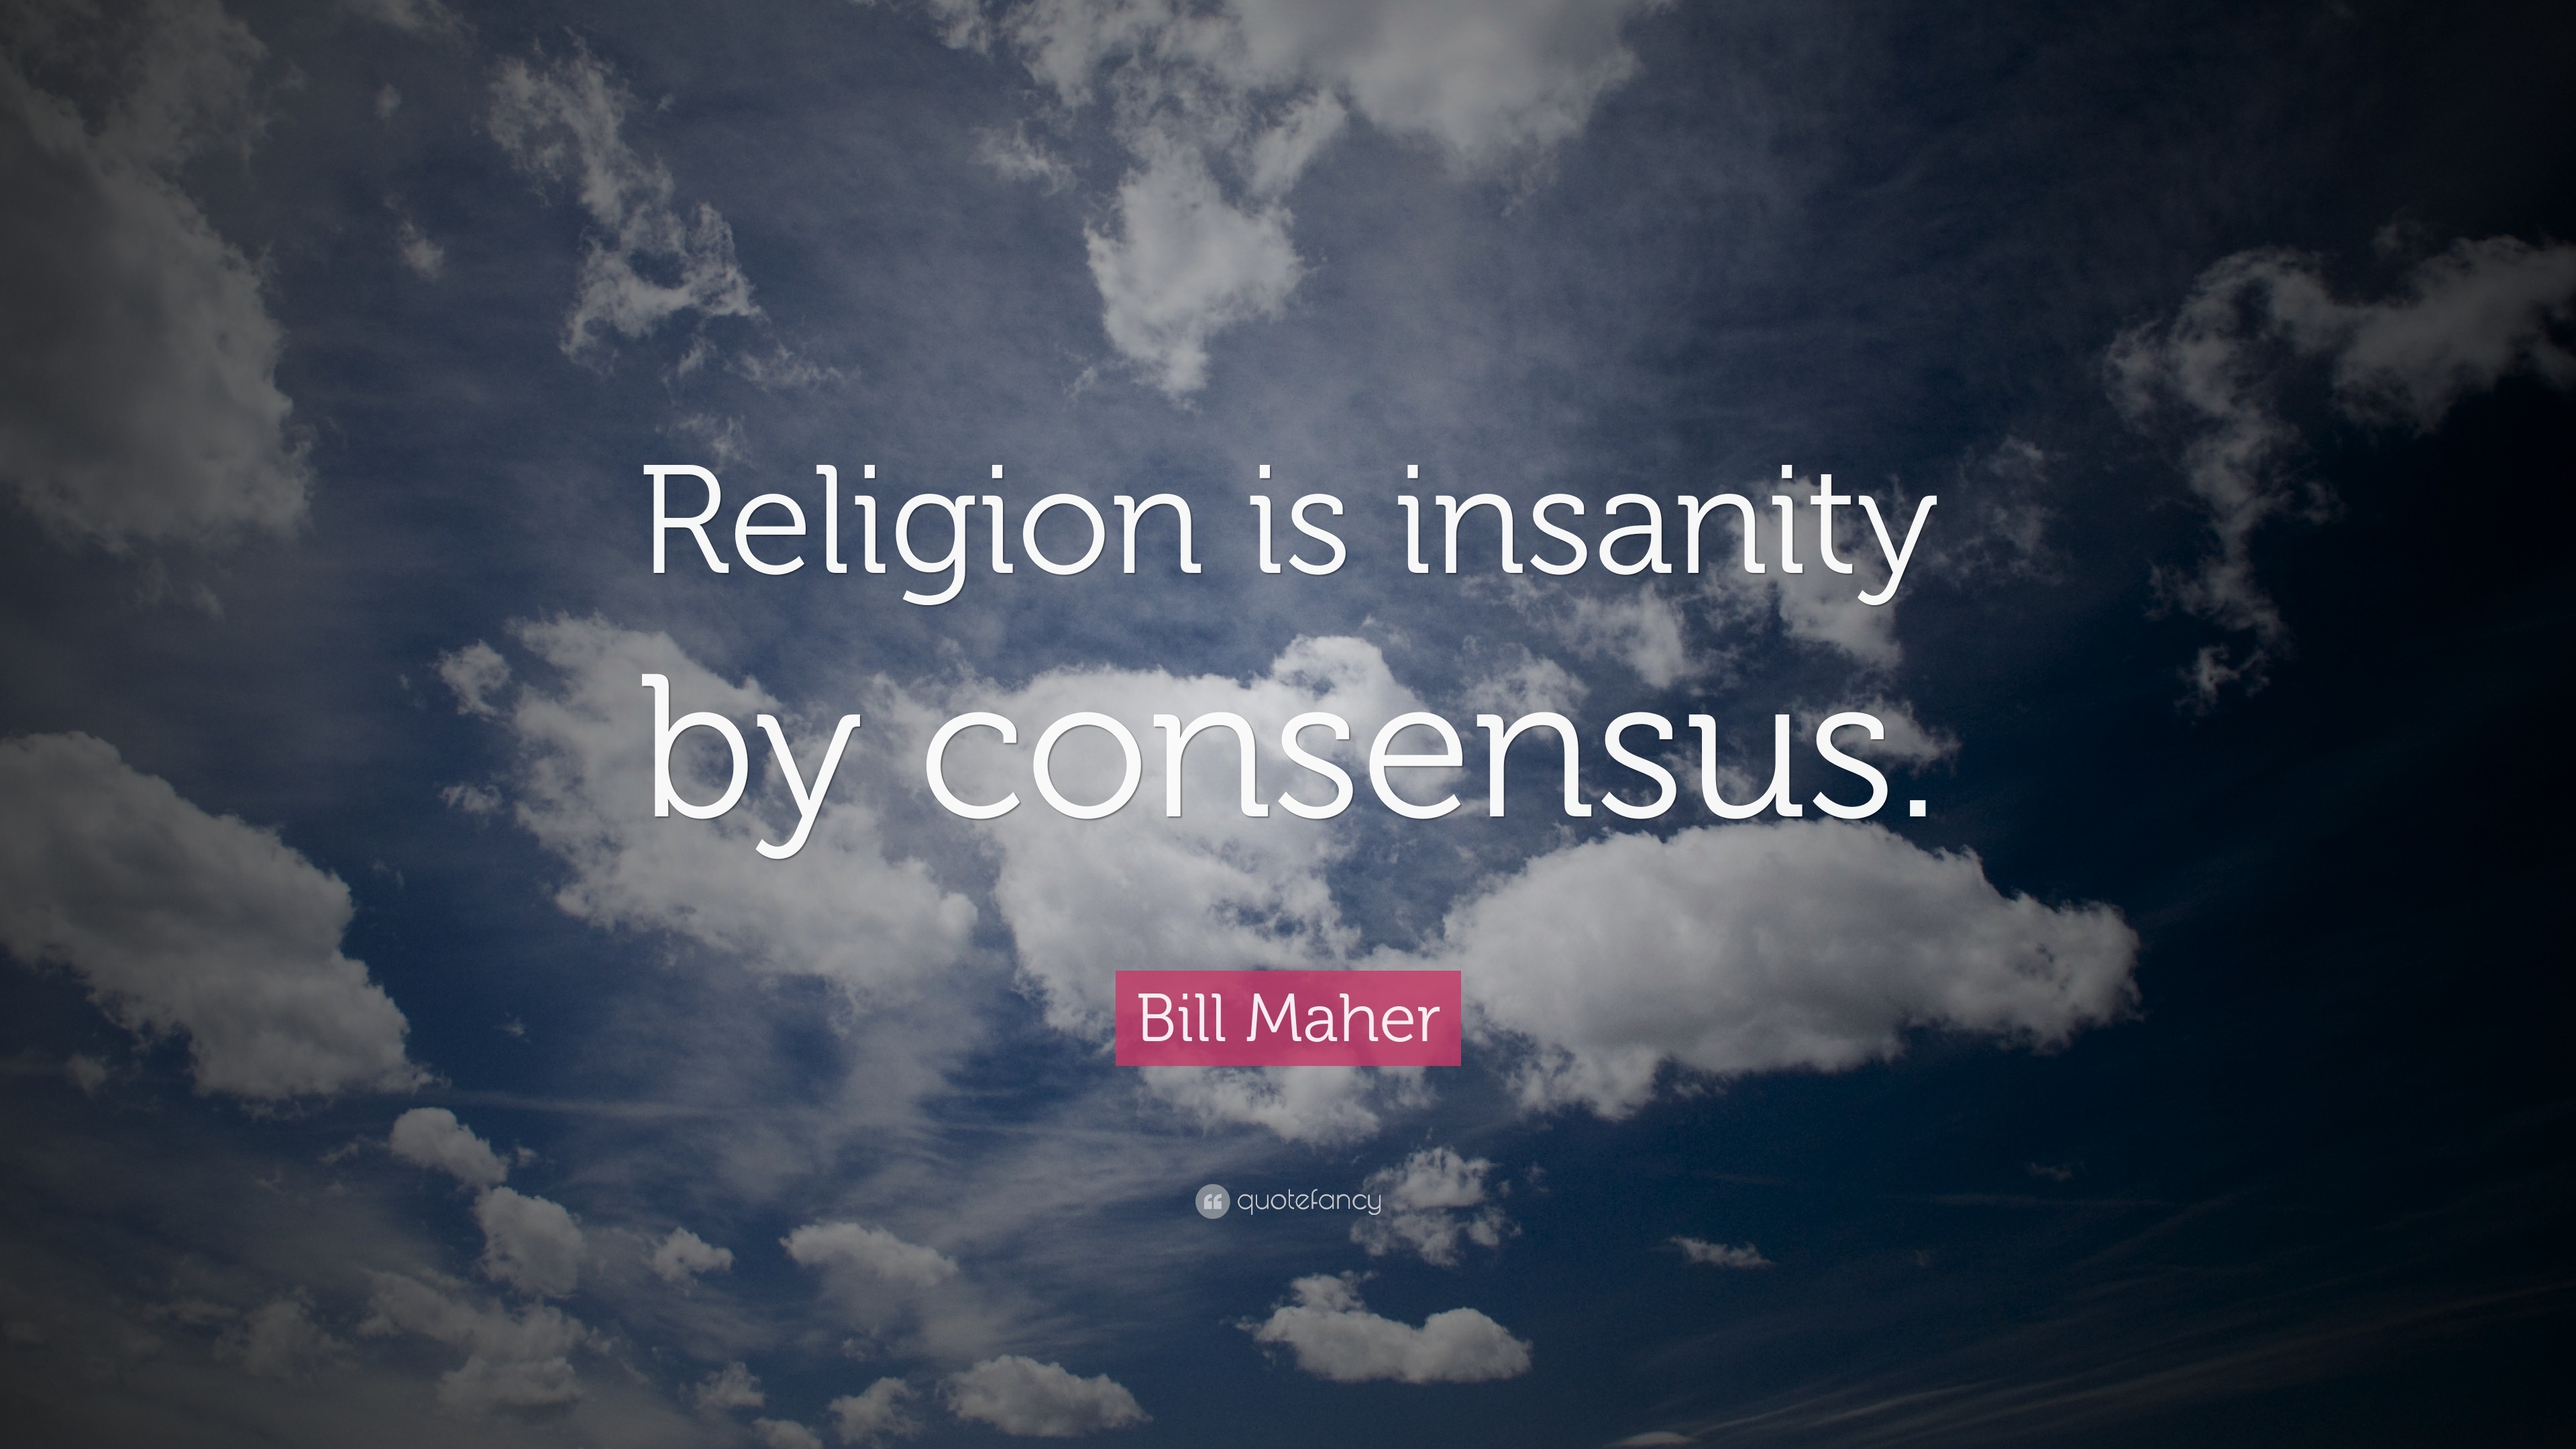 3840x2160 Bill Maher Quote: “Religion is insanity by consensus.”